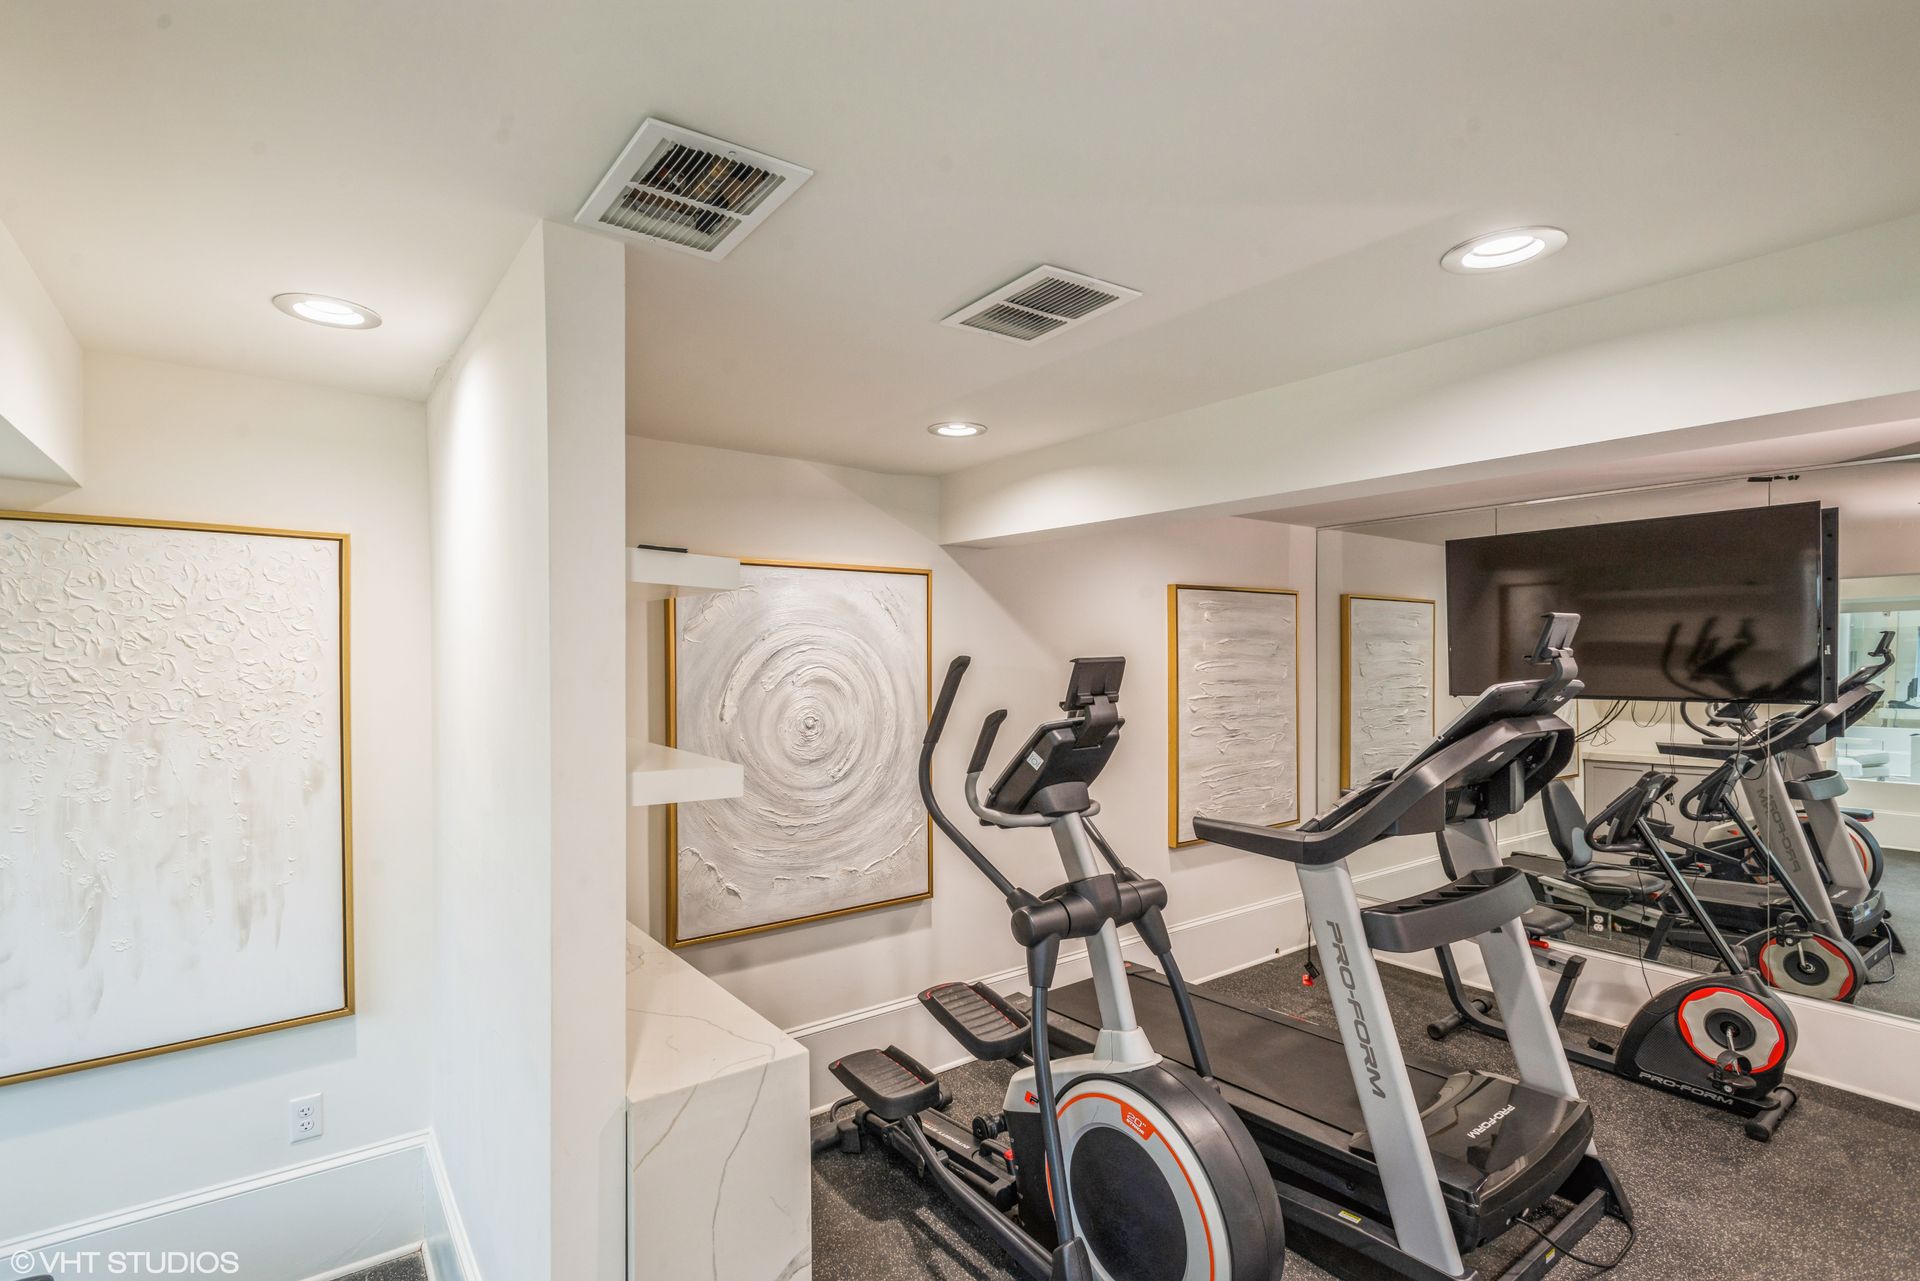 Overland Station apartment community fitness center with machines.